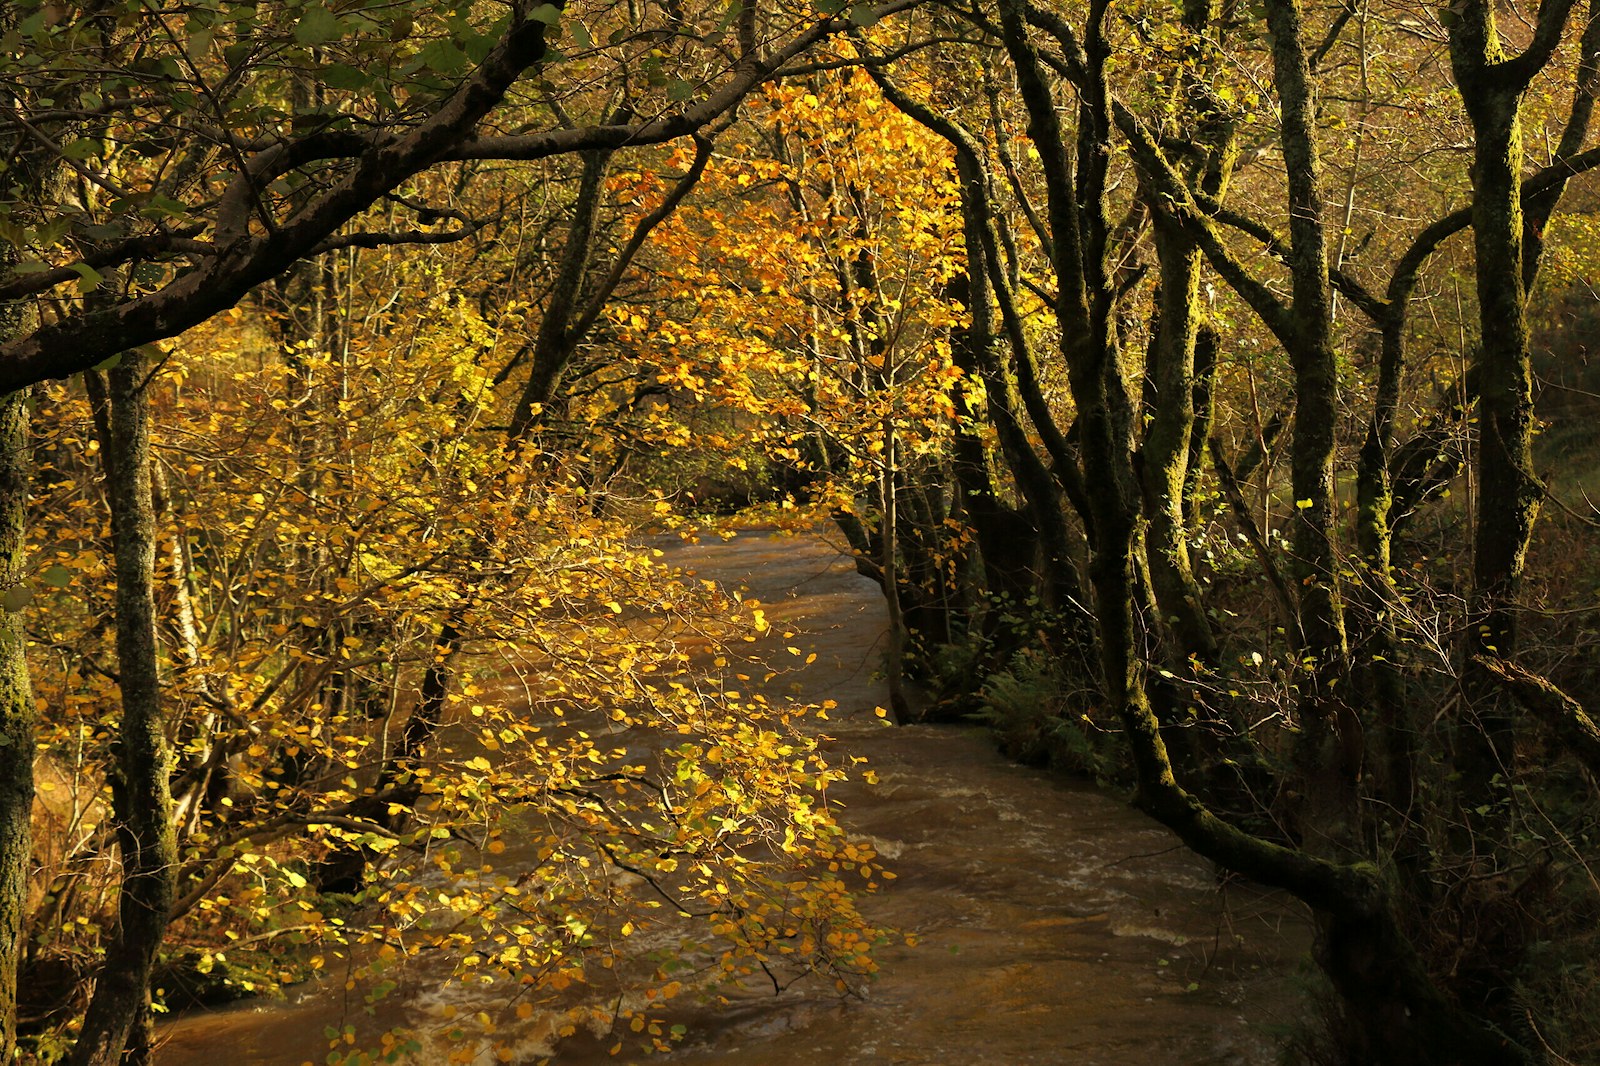 The River Marteg meandering beneath autumnal trees adorned with golden leaves at the Glifach Rewilding Project